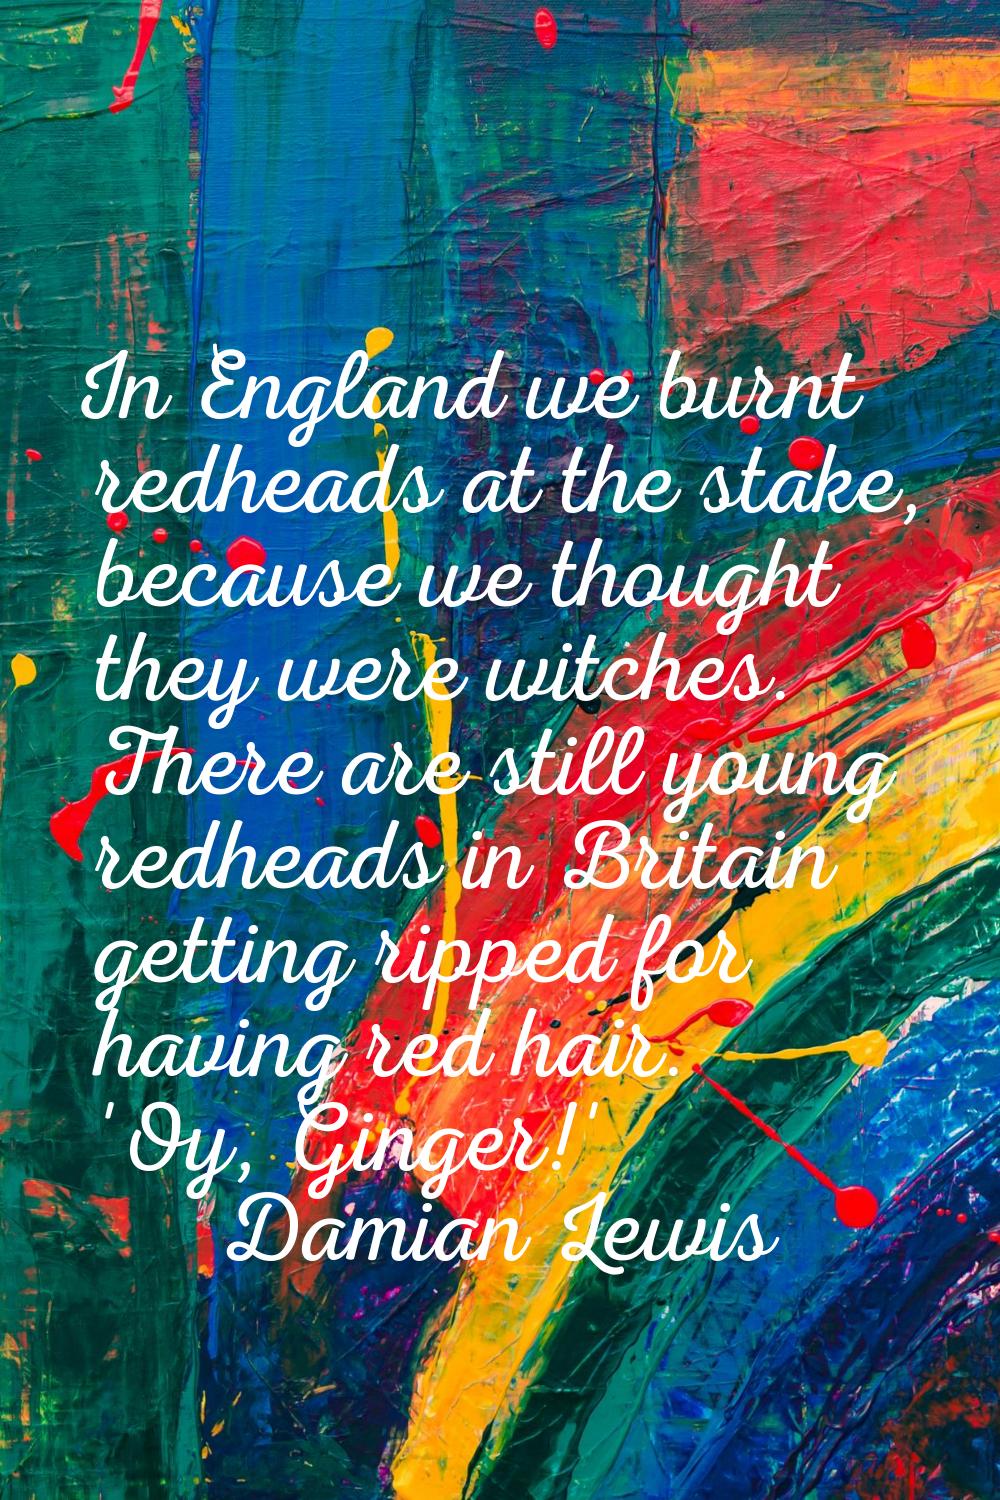 In England we burnt redheads at the stake, because we thought they were witches. There are still yo